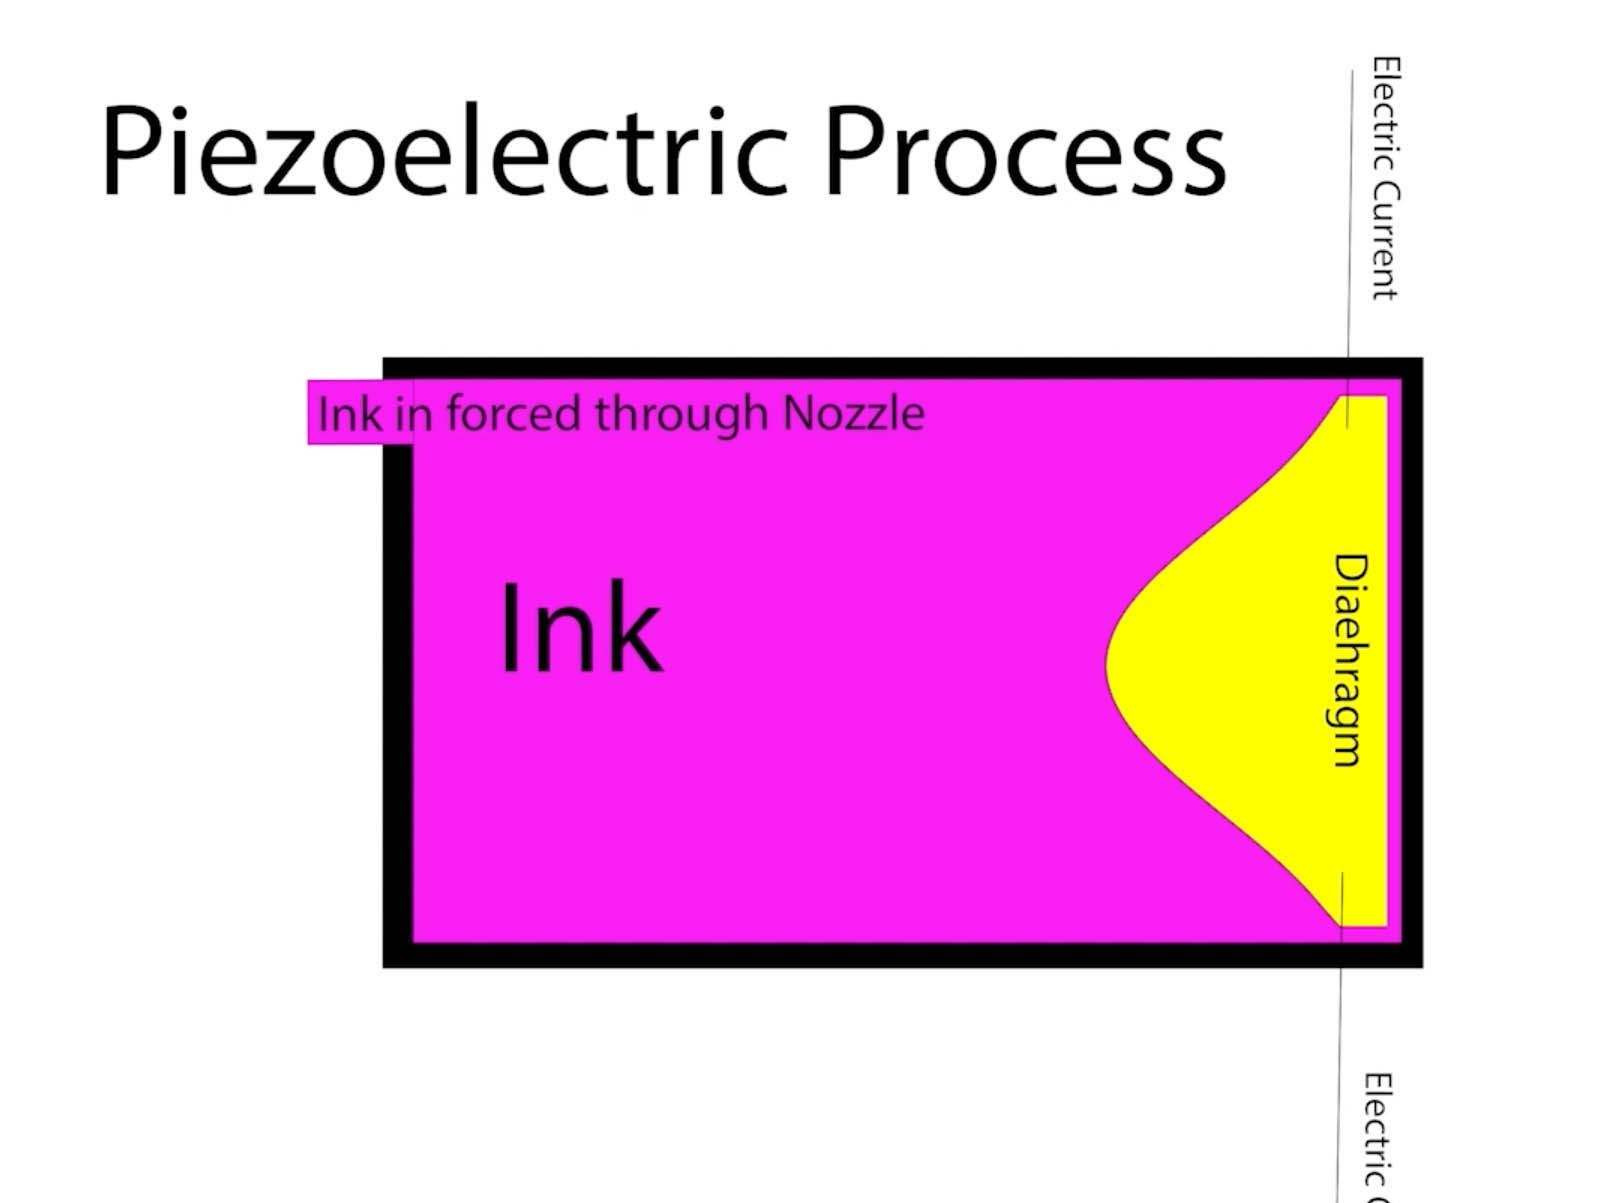 Piezoelectric process - how does an inkjet printer actually work?